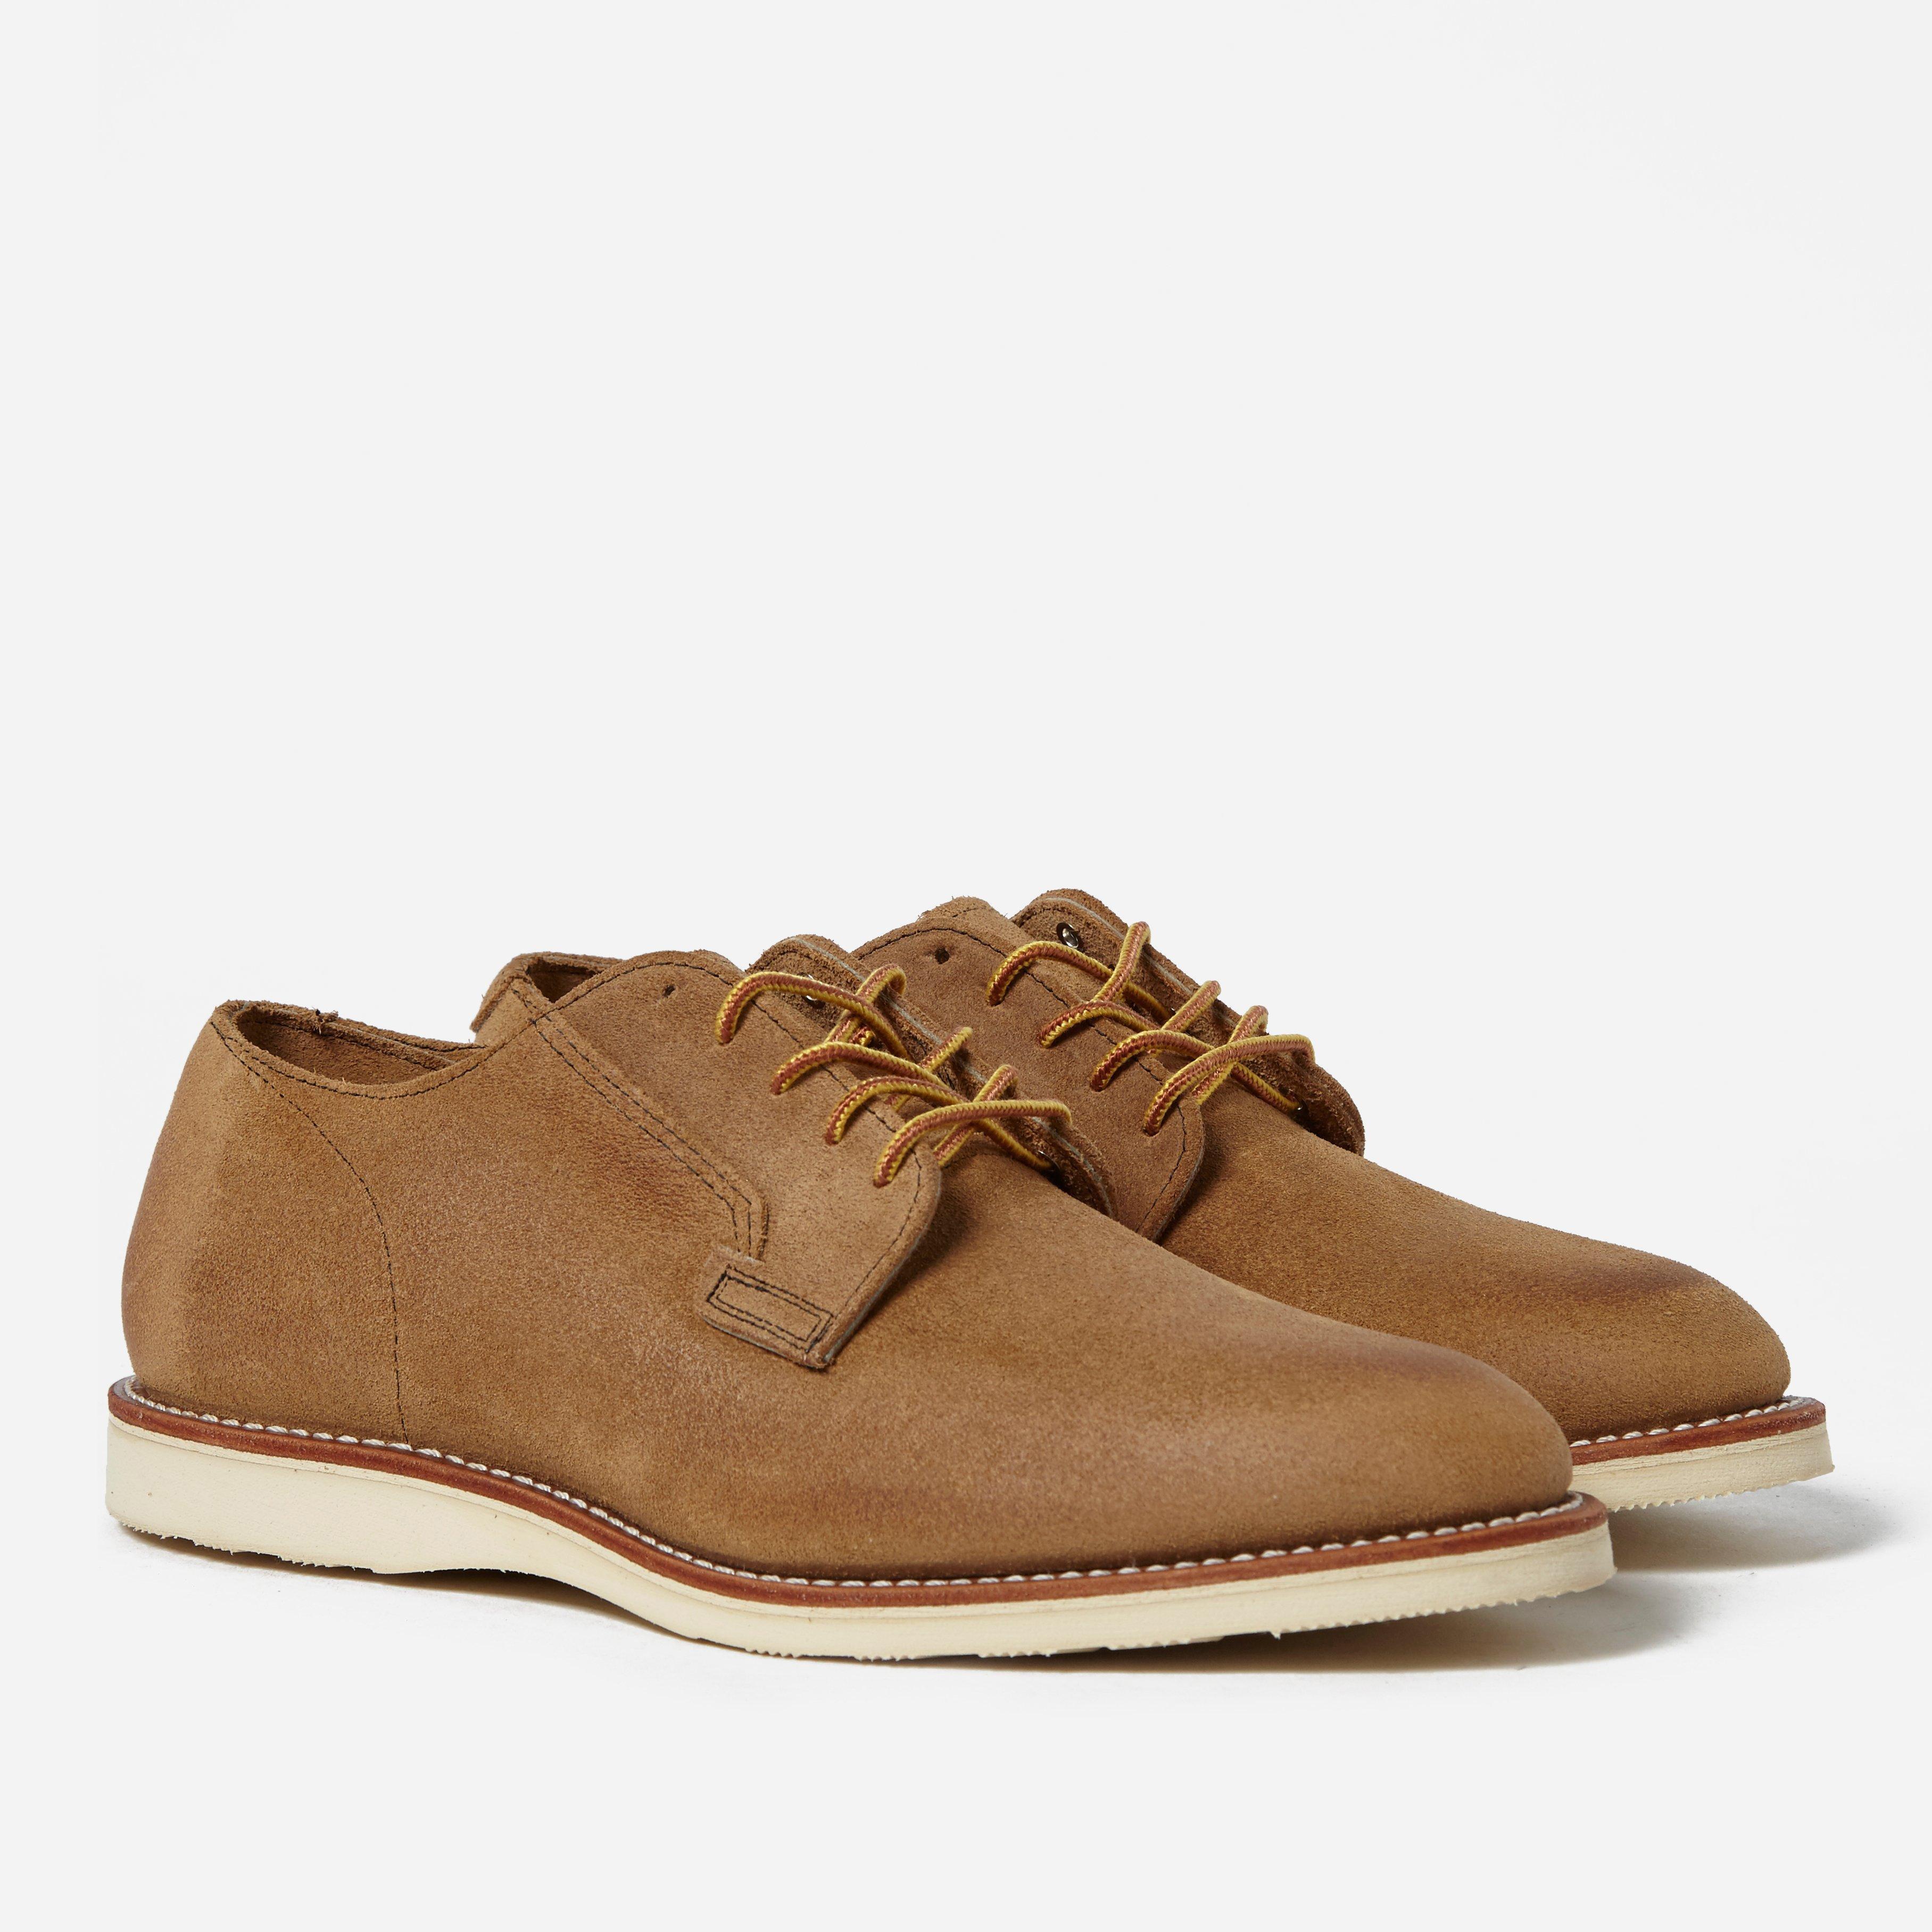 Lyst - Red Wing 3120 Work Postman Oxford Shoe in Brown for Men